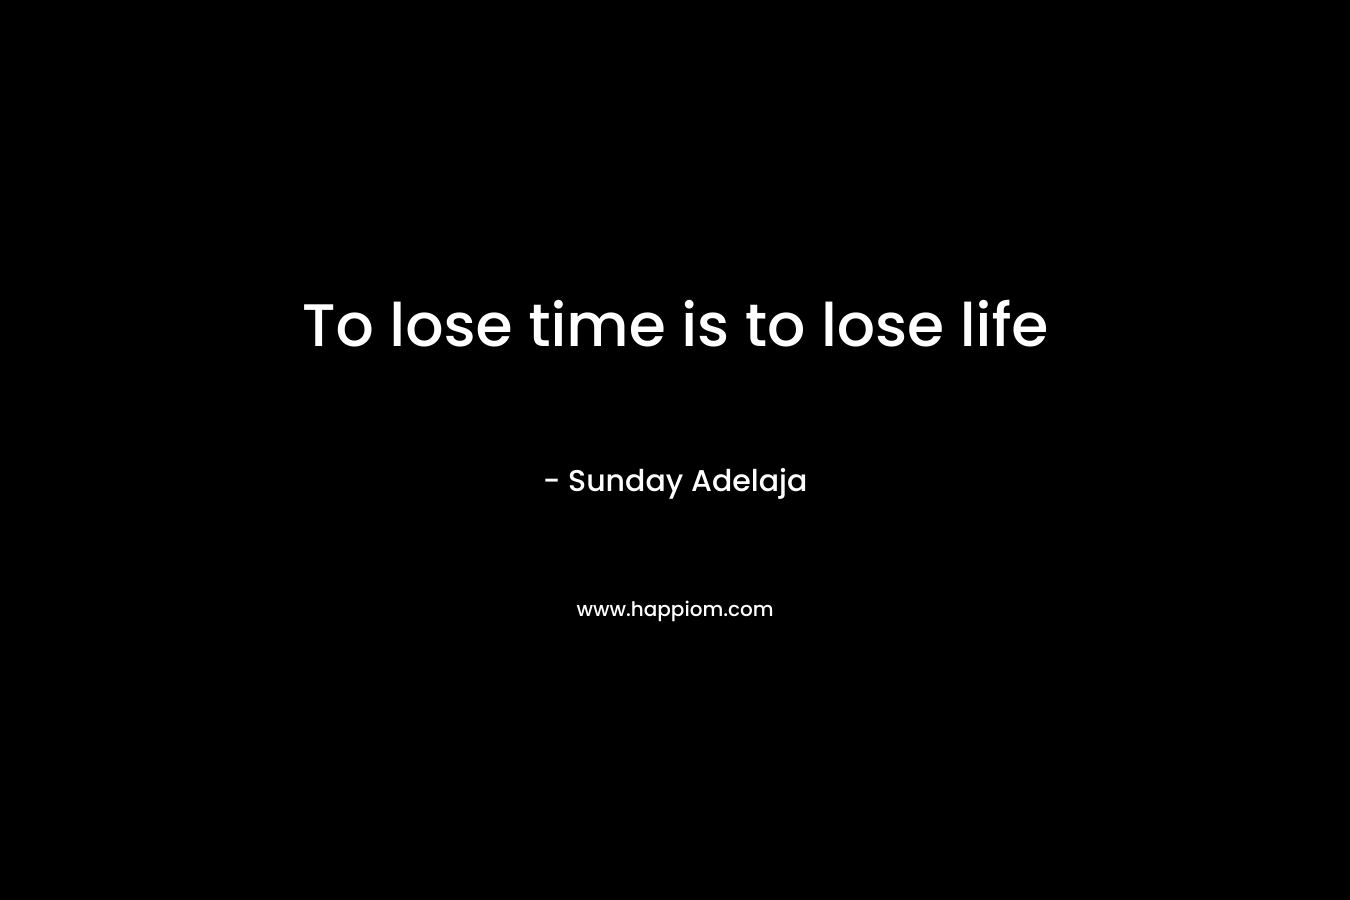 To lose time is to lose life